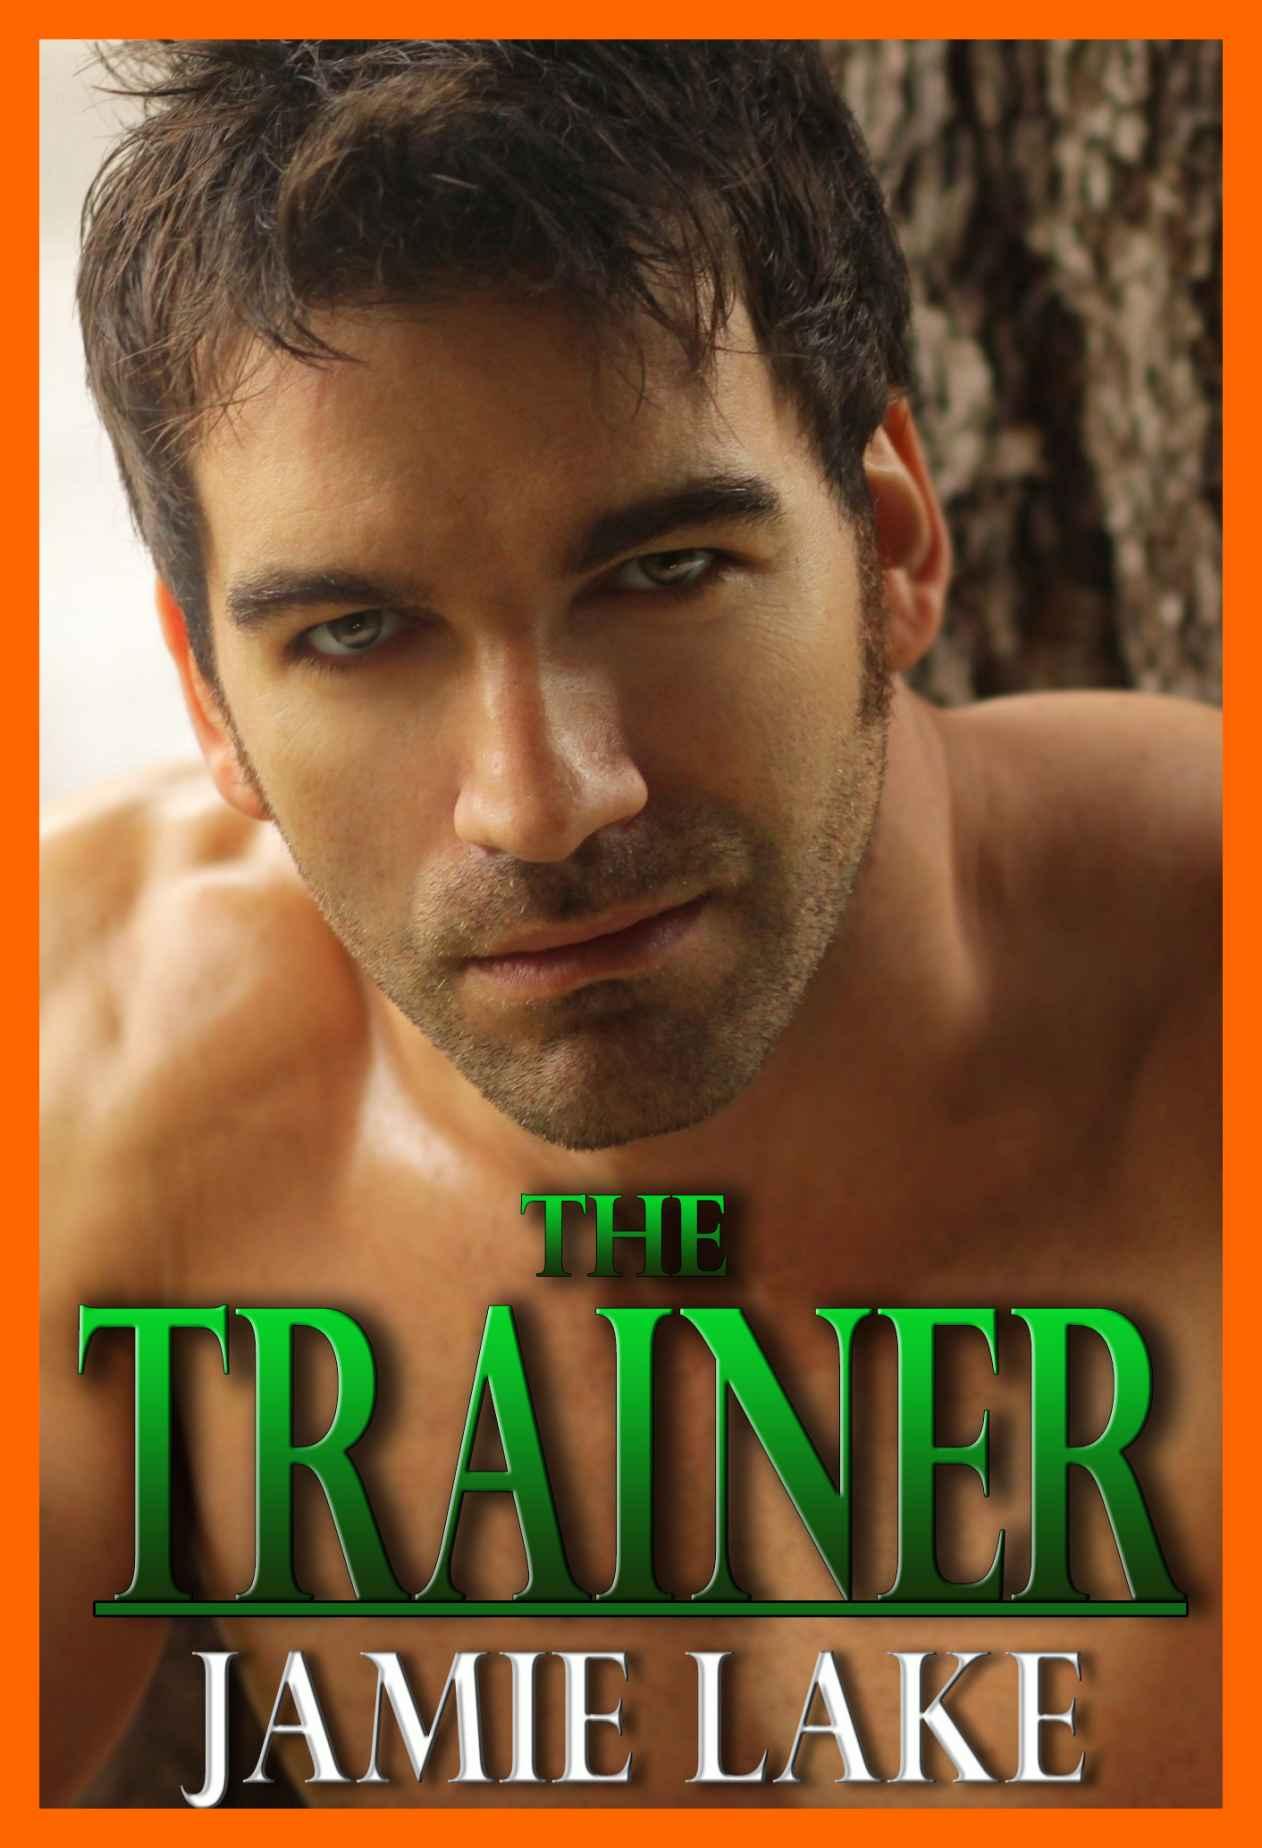 The Trainer by Jamie Lake